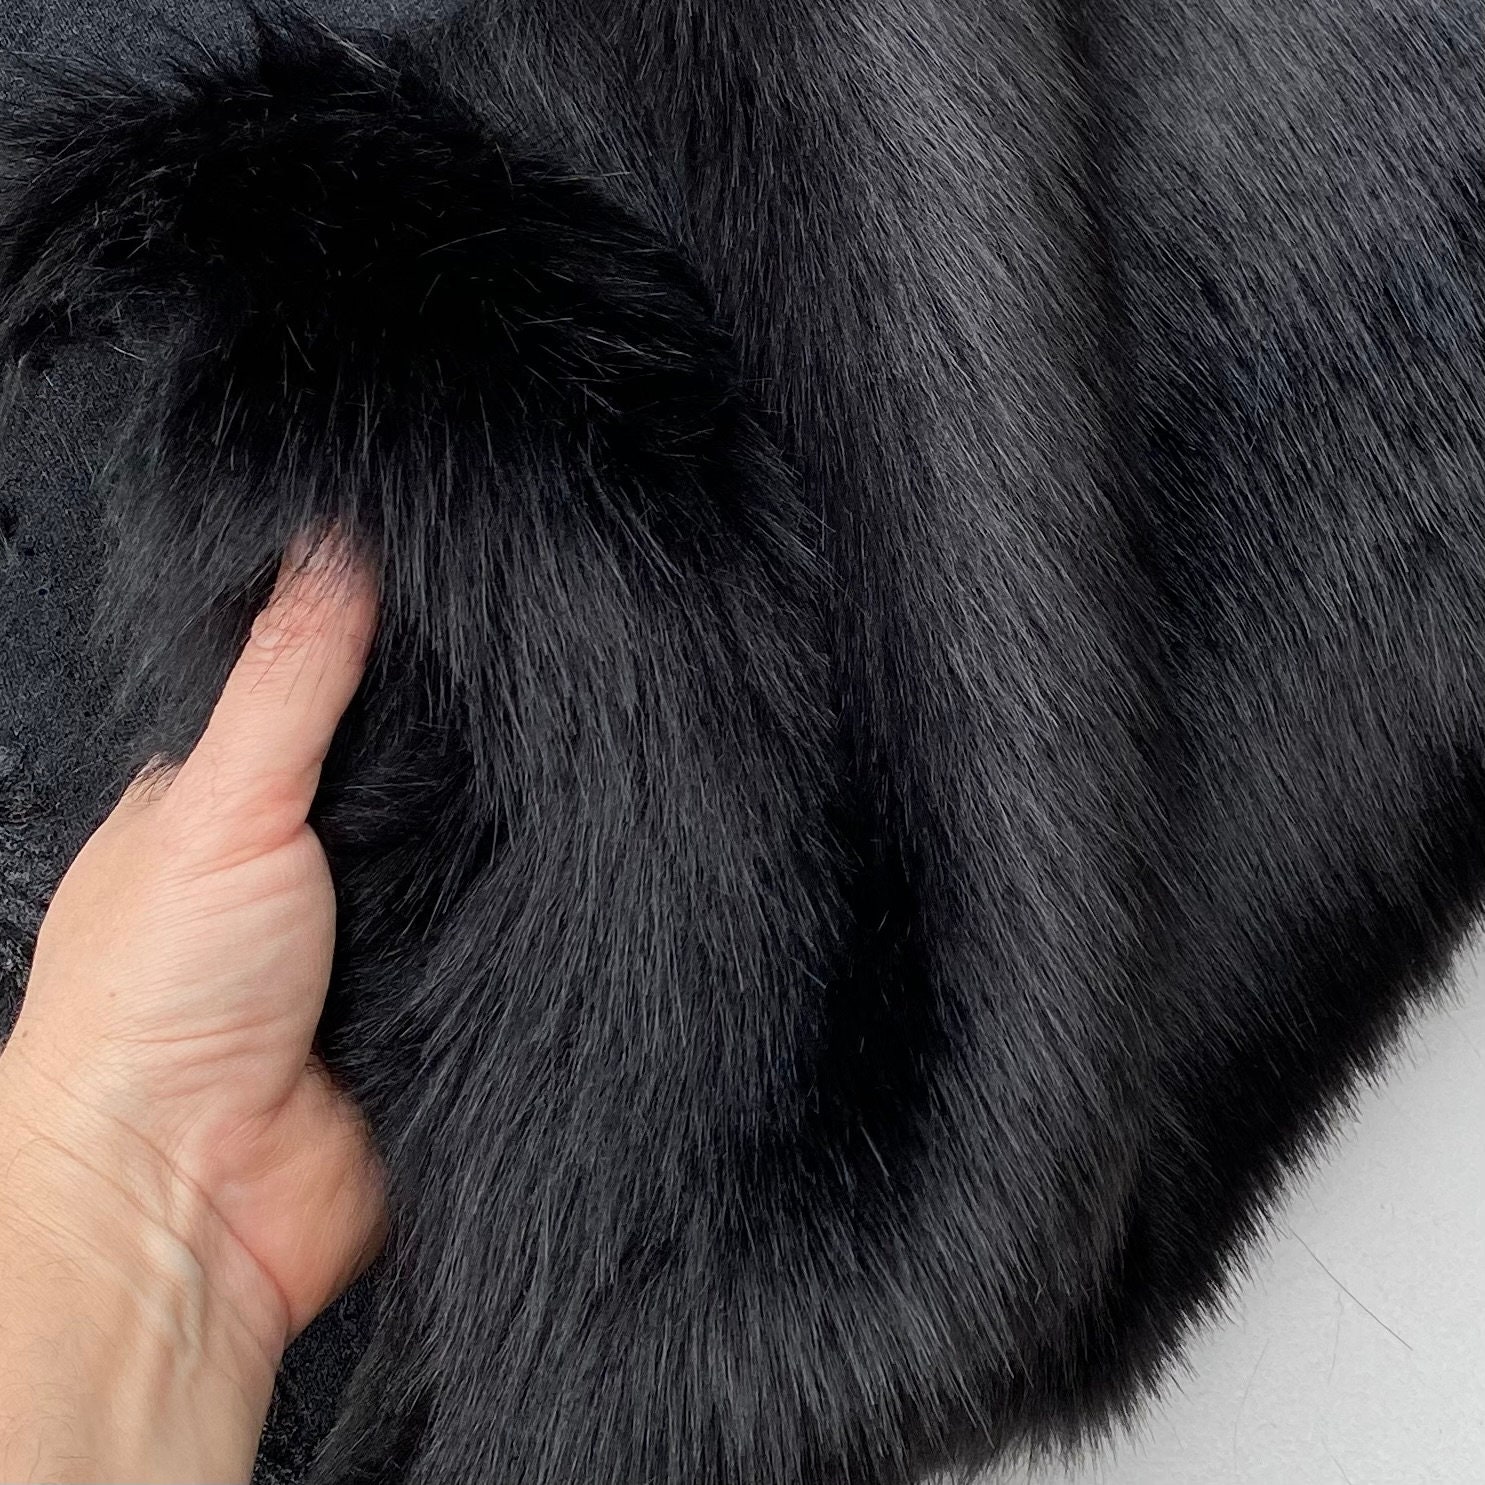 Bianna BLACK Long Pile Faux Fur Fabric, Shag Shaggy Material in Pieces,  Perfect for Gnome Beards Crafts, Fursuit, Costume 